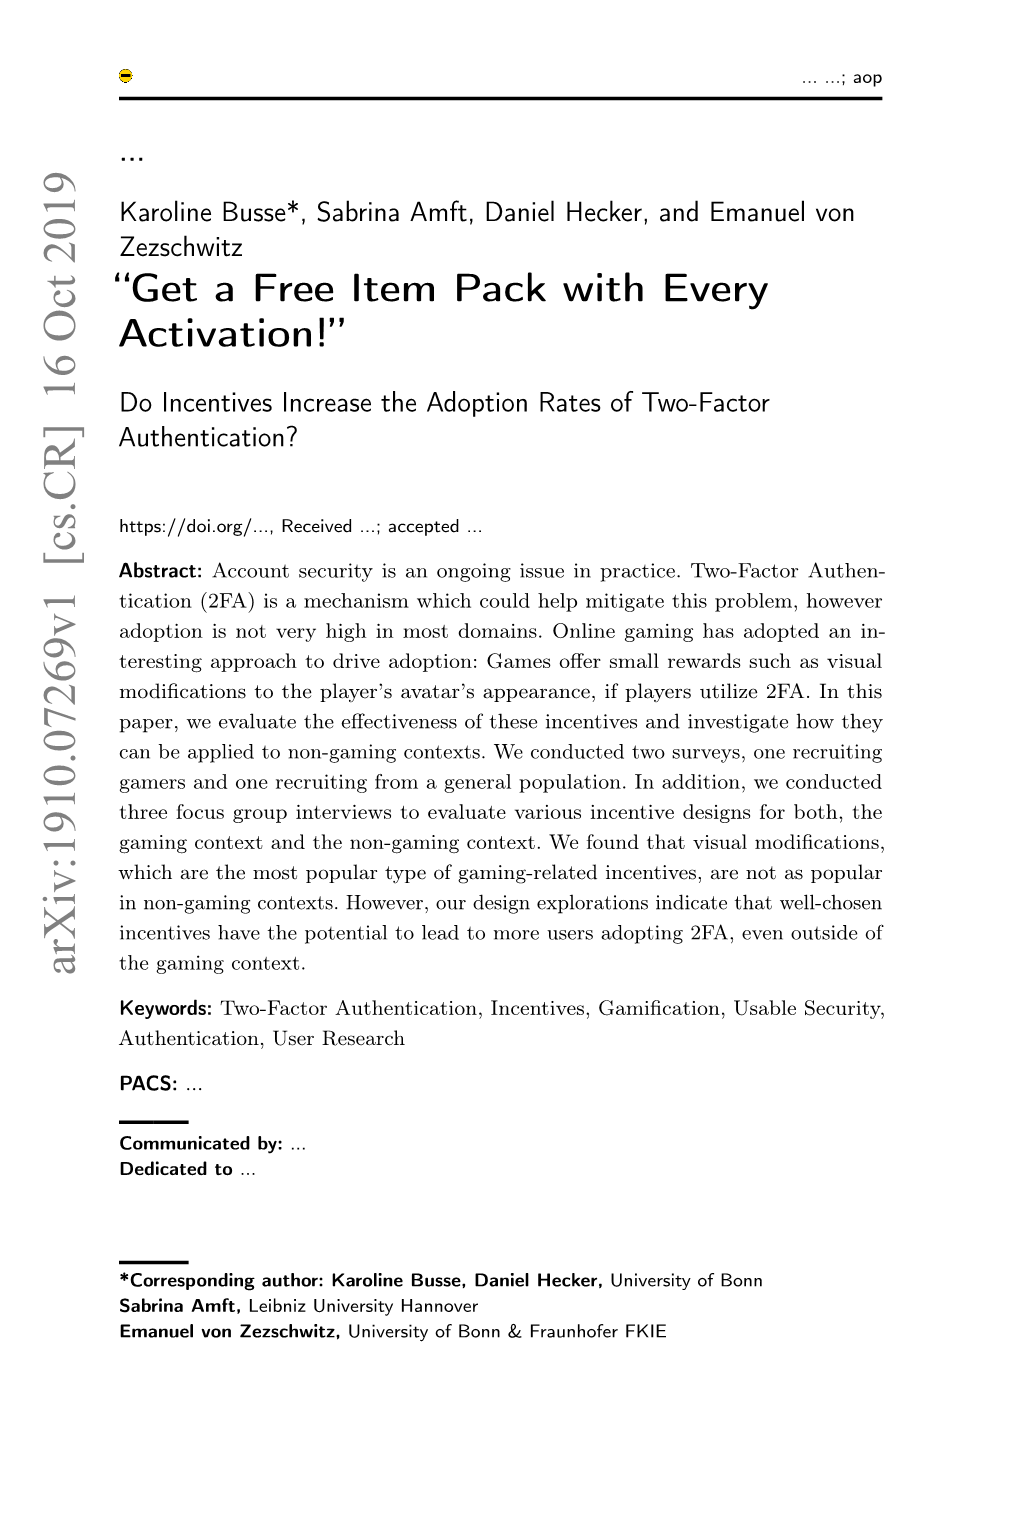 " Get a Free Item Pack with Every Activation!"--Do Incentives Increase the Adoption Rates of Two-Factor Authentication?